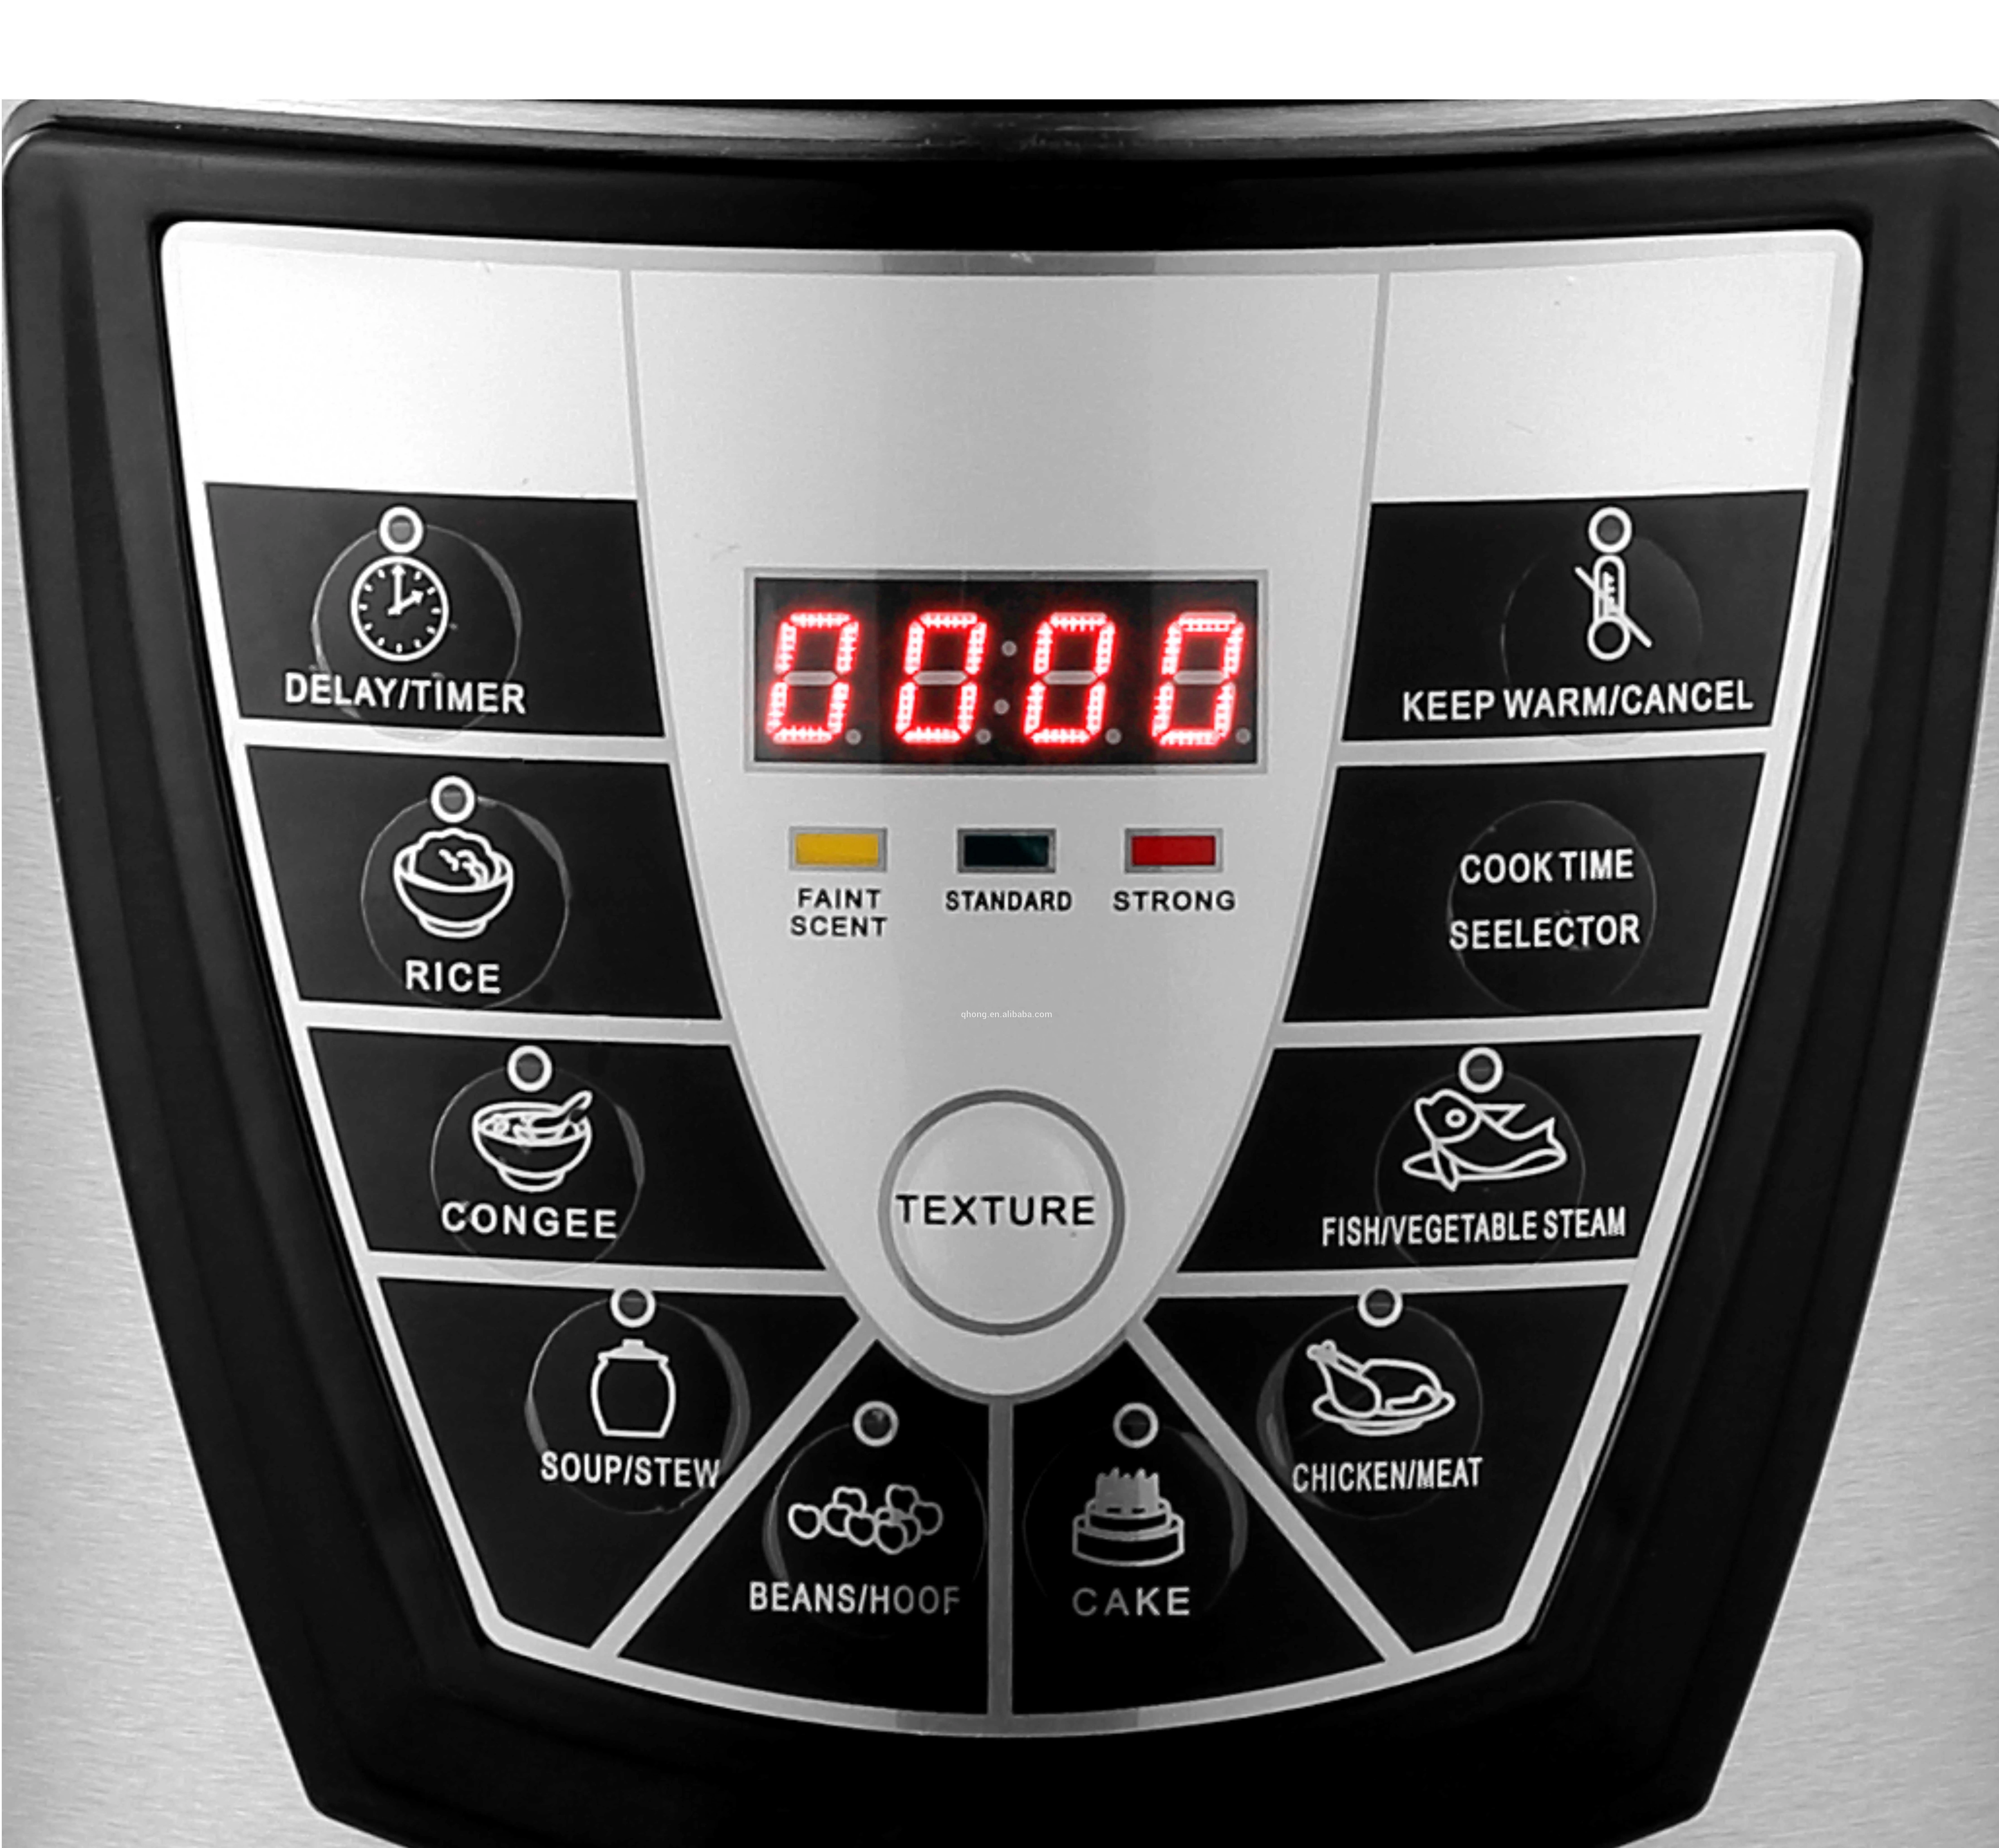 Pressure Cooker Multi 4 Liters Black Cover Led Computer Oem Steel Switch Stainless Power Time Sets